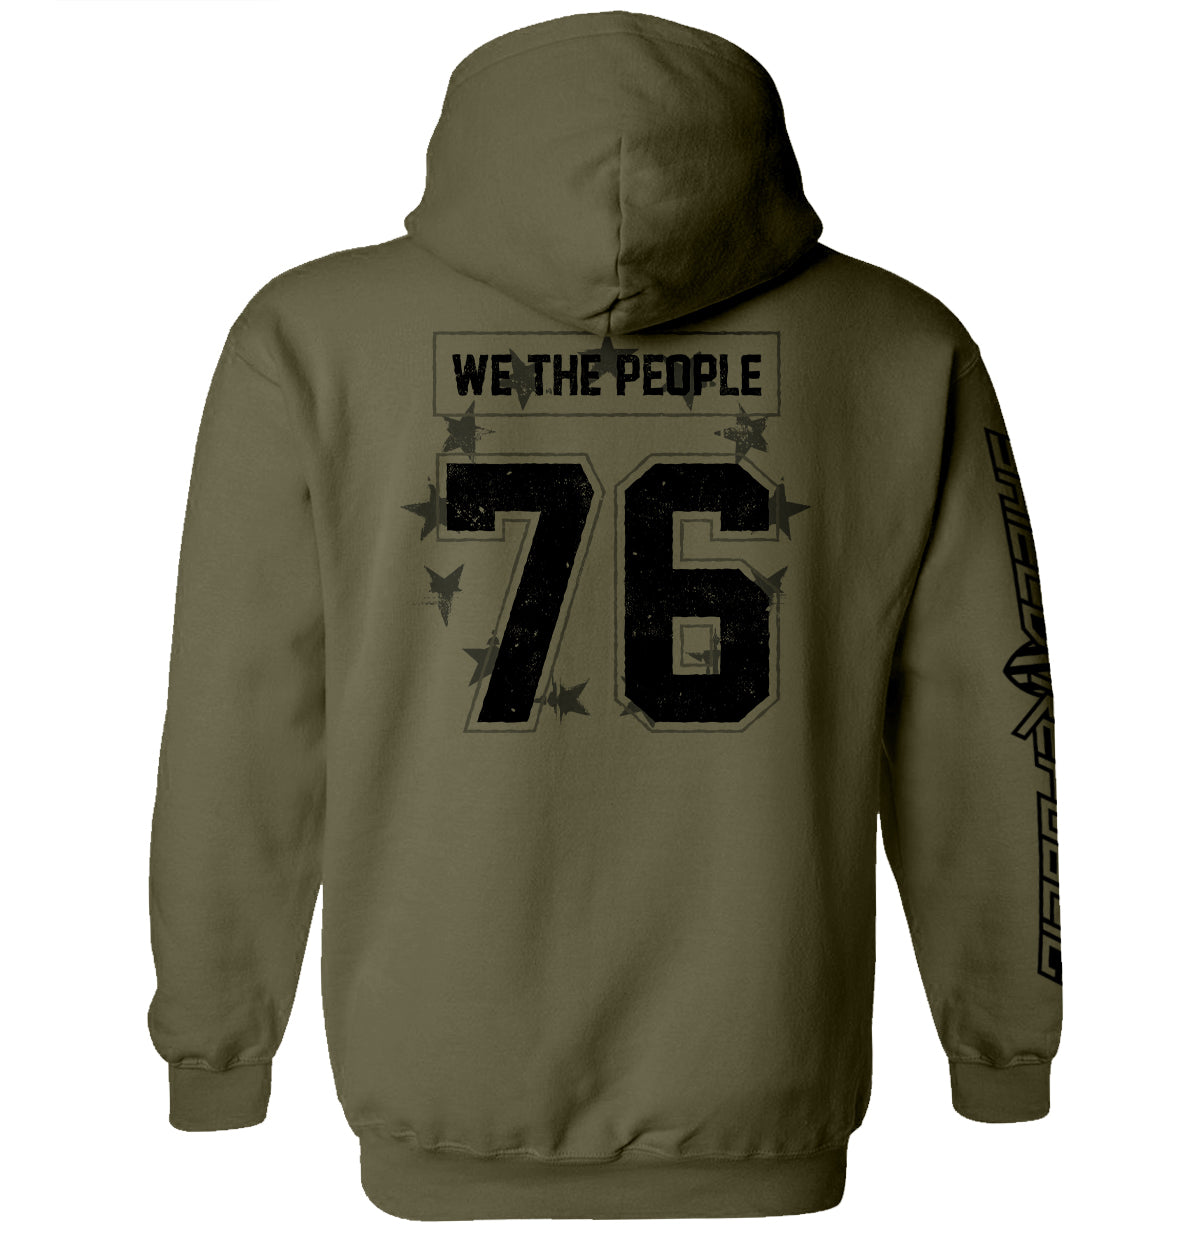 We the People 76 Jersey